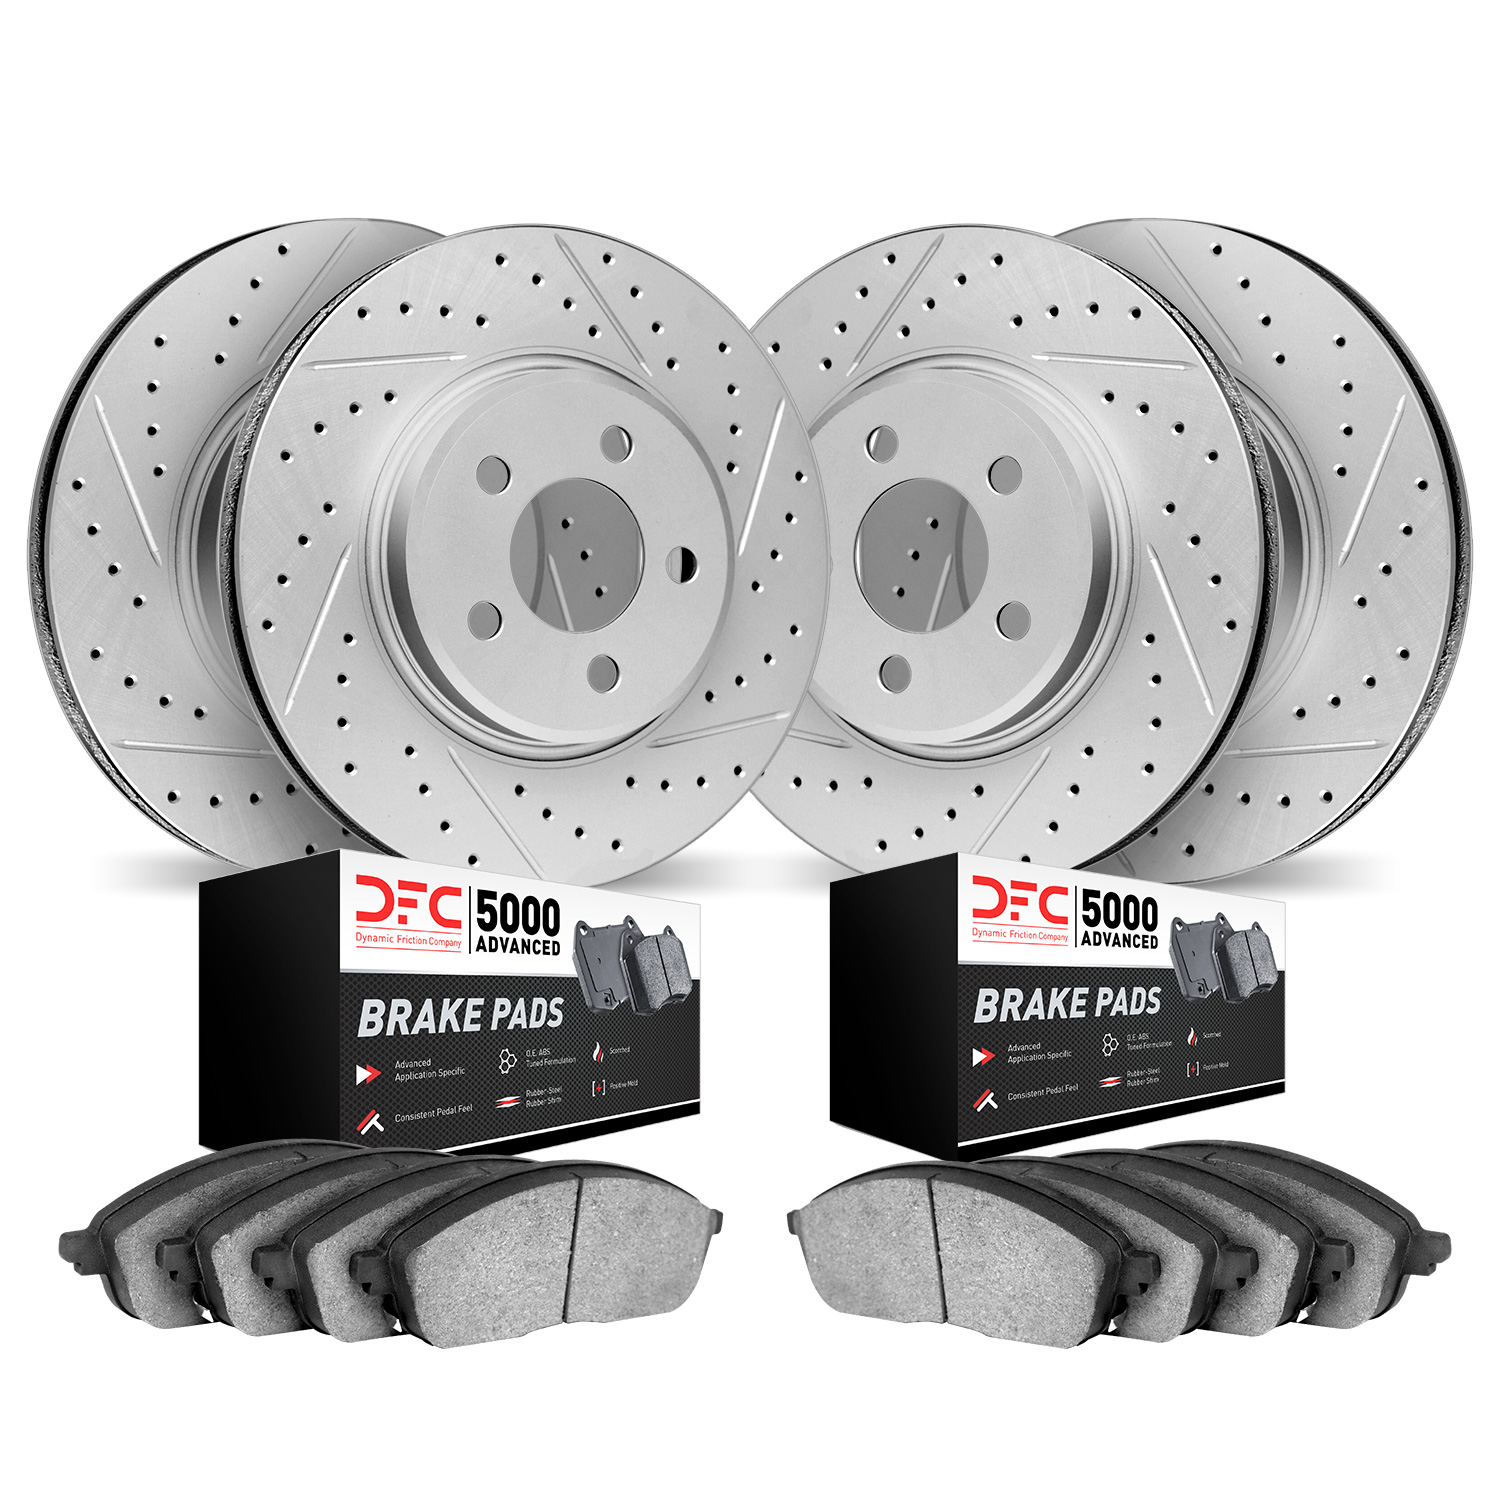 2504-31040 Geoperformance Drilled/Slotted Rotors w/5000 Advanced Brake Pads Kit, 2013-2018 BMW, Position: Front and Rear